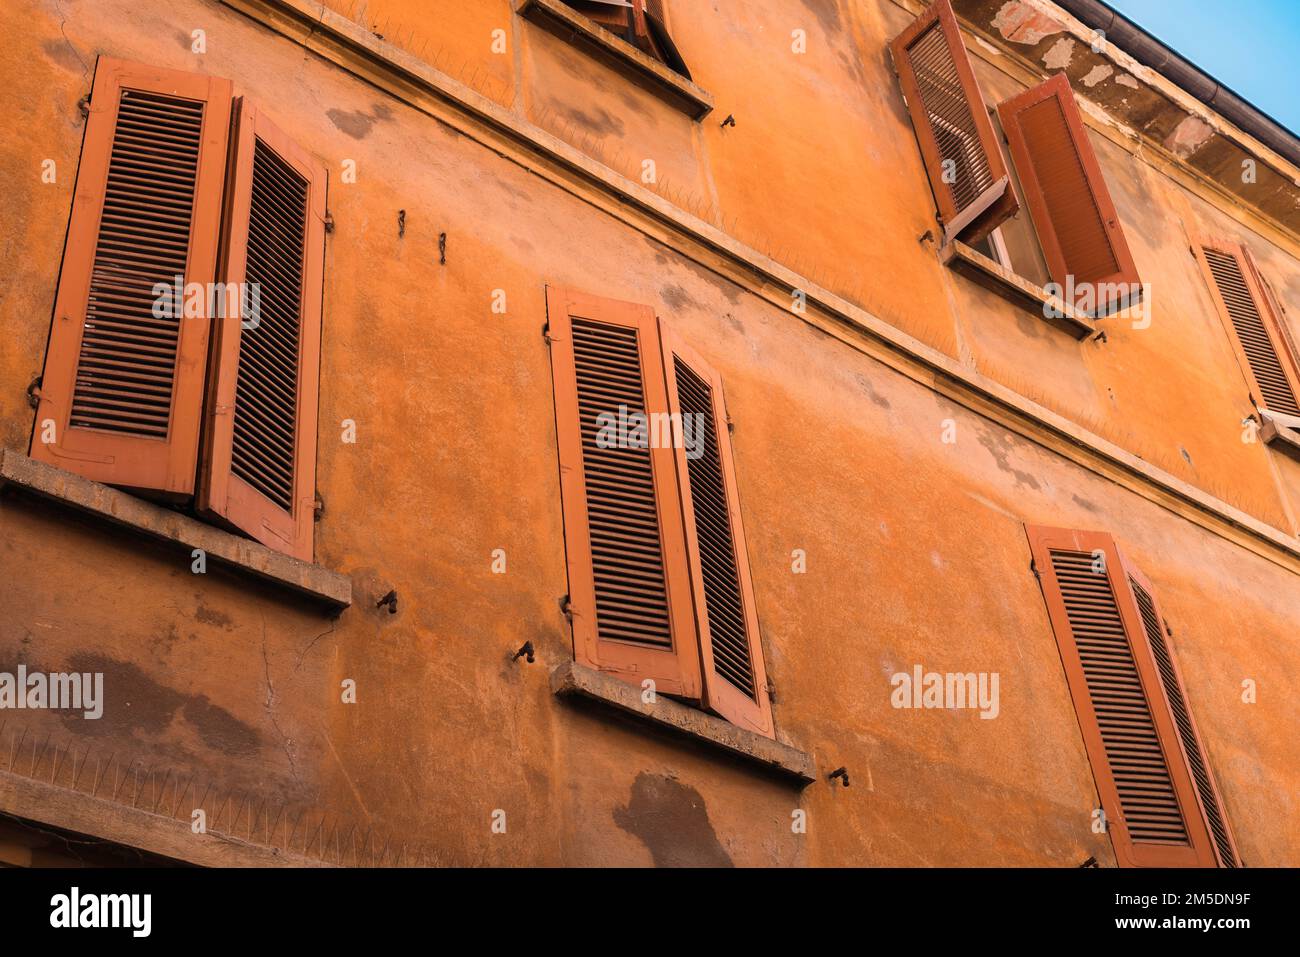 Shutters Italy, view of a colorful building with orange shutters in the scenic old town area of Mantua (Mantova), Lombardy, Italy Stock Photo